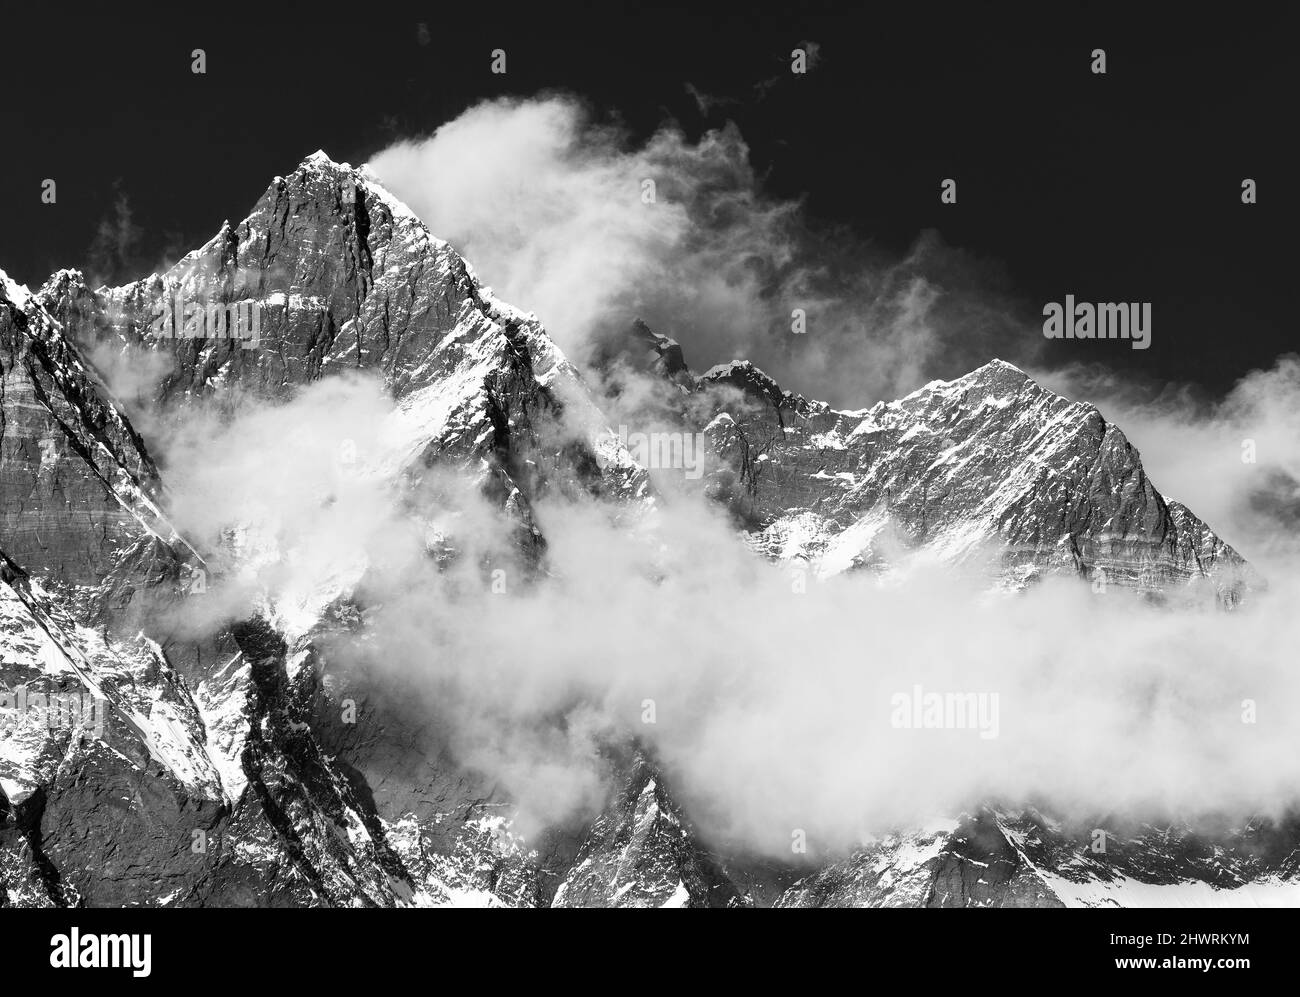 Mount Lhotse with clouds on the top - way to mount Everest base camp, Khumbu valley, Sagarmatha national park, Nepalese Himalayas mountains, black and Stock Photo